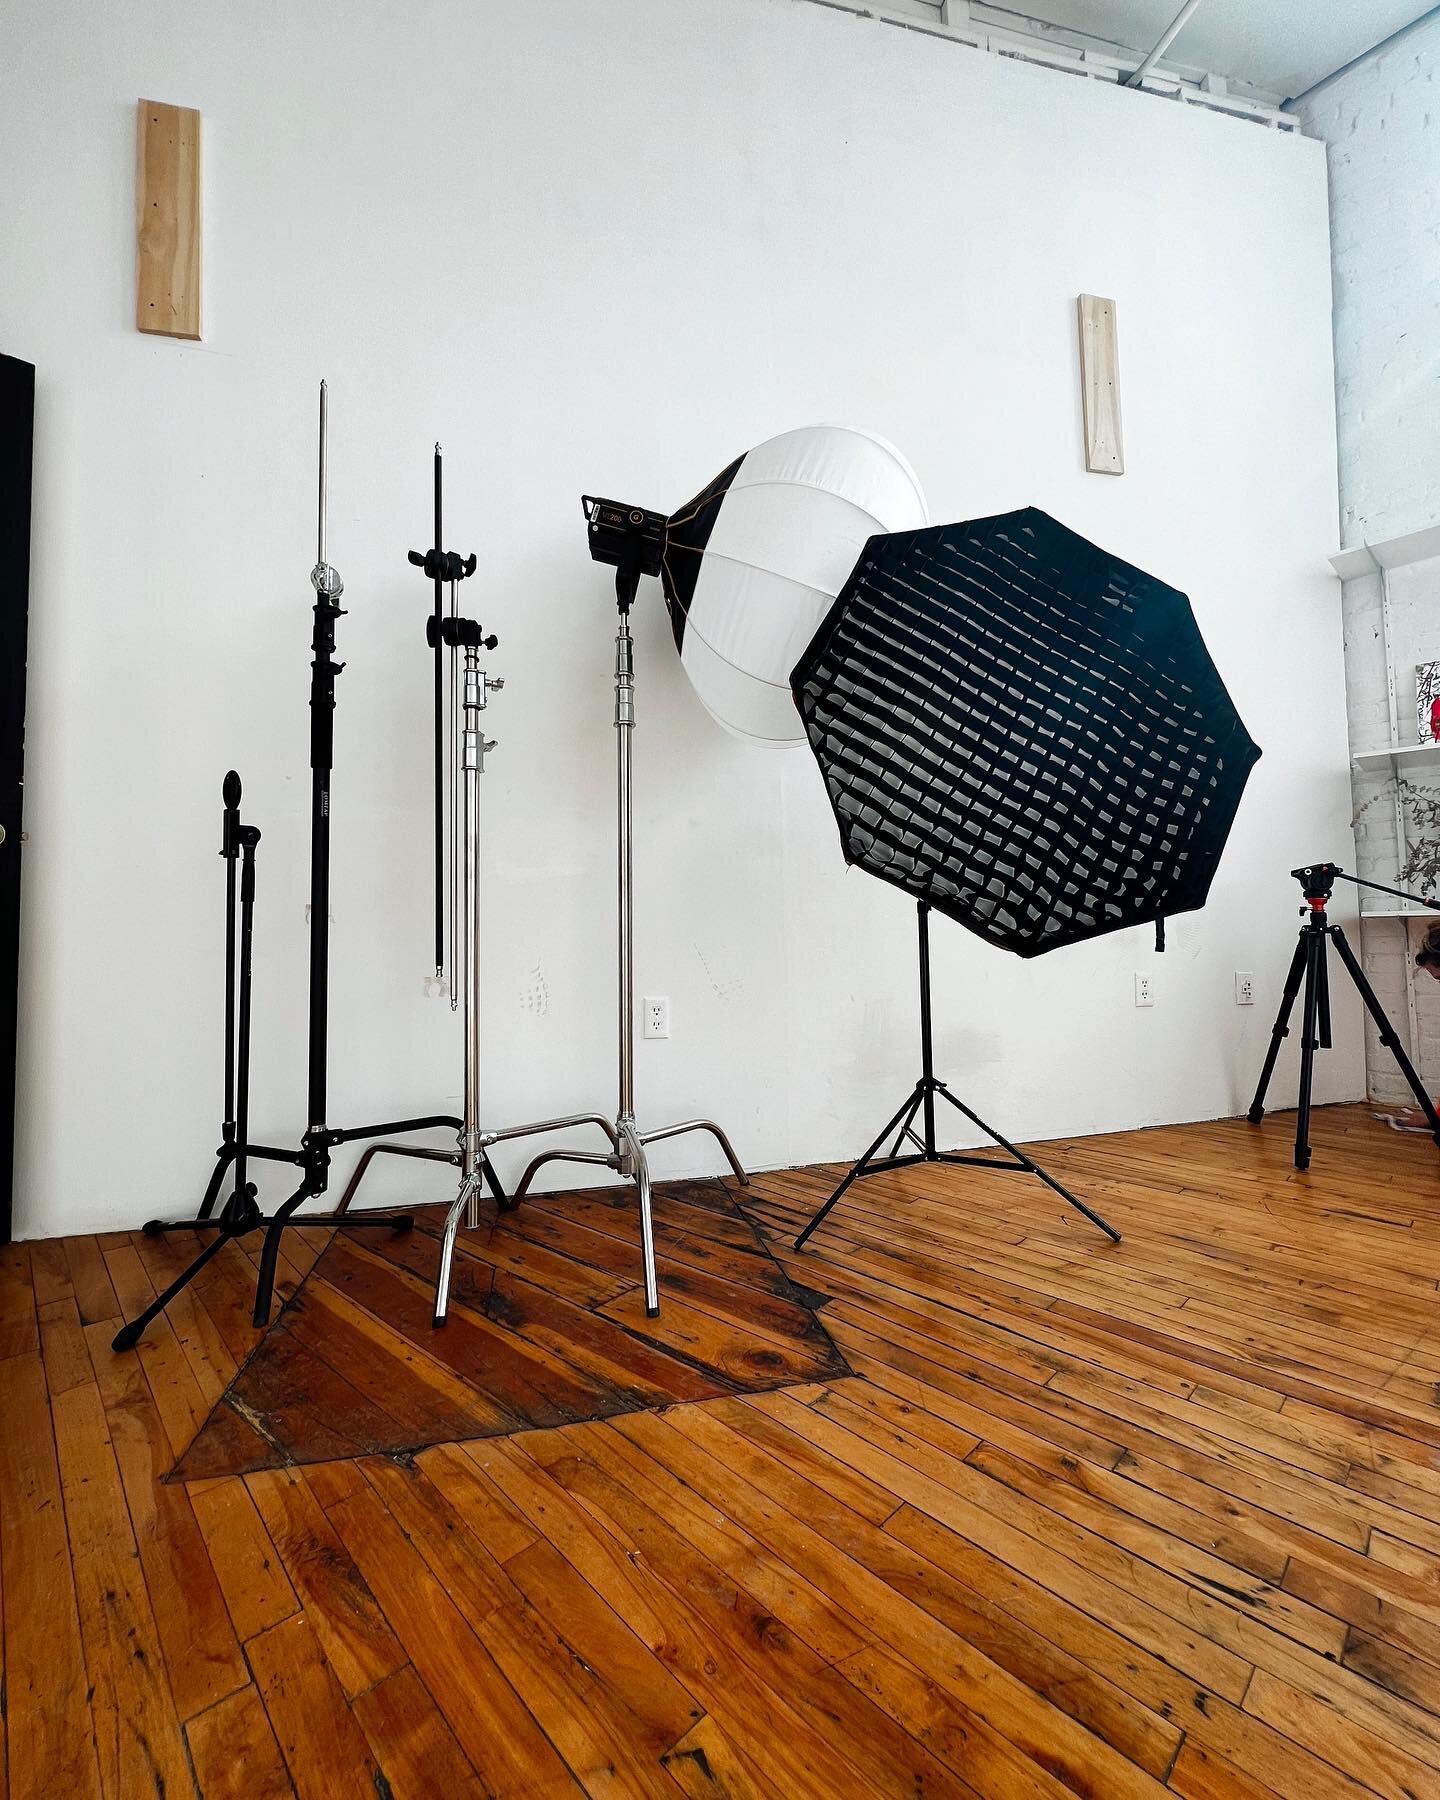 You can never have enough c-stands as part of your video and photography equipment. These will hold up anything your throw on them. Once you learn the many ways they can be used. They go beyond just another lighting stand. 
. 
#filmmaking #lightingeq